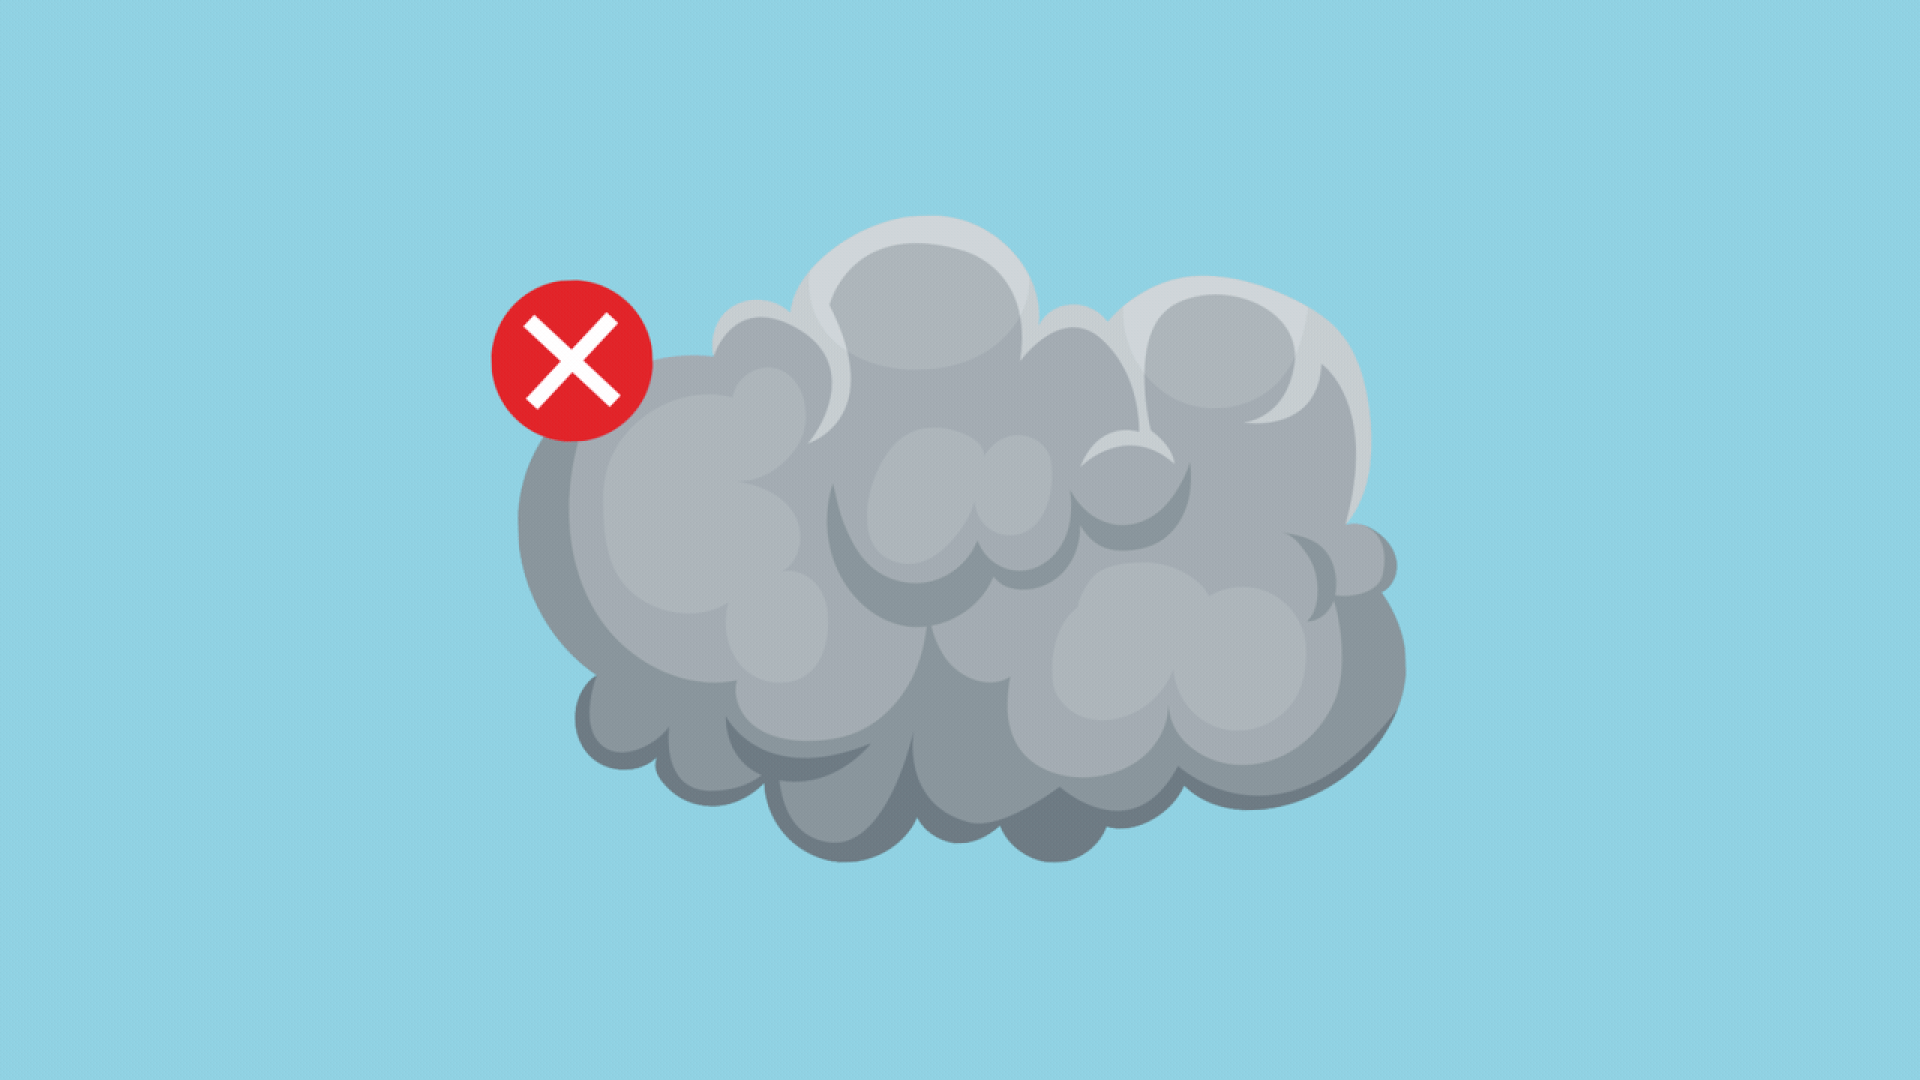 Illustration of a carbon cloud with an "X" on it, wiggling as if about to be deleted. 